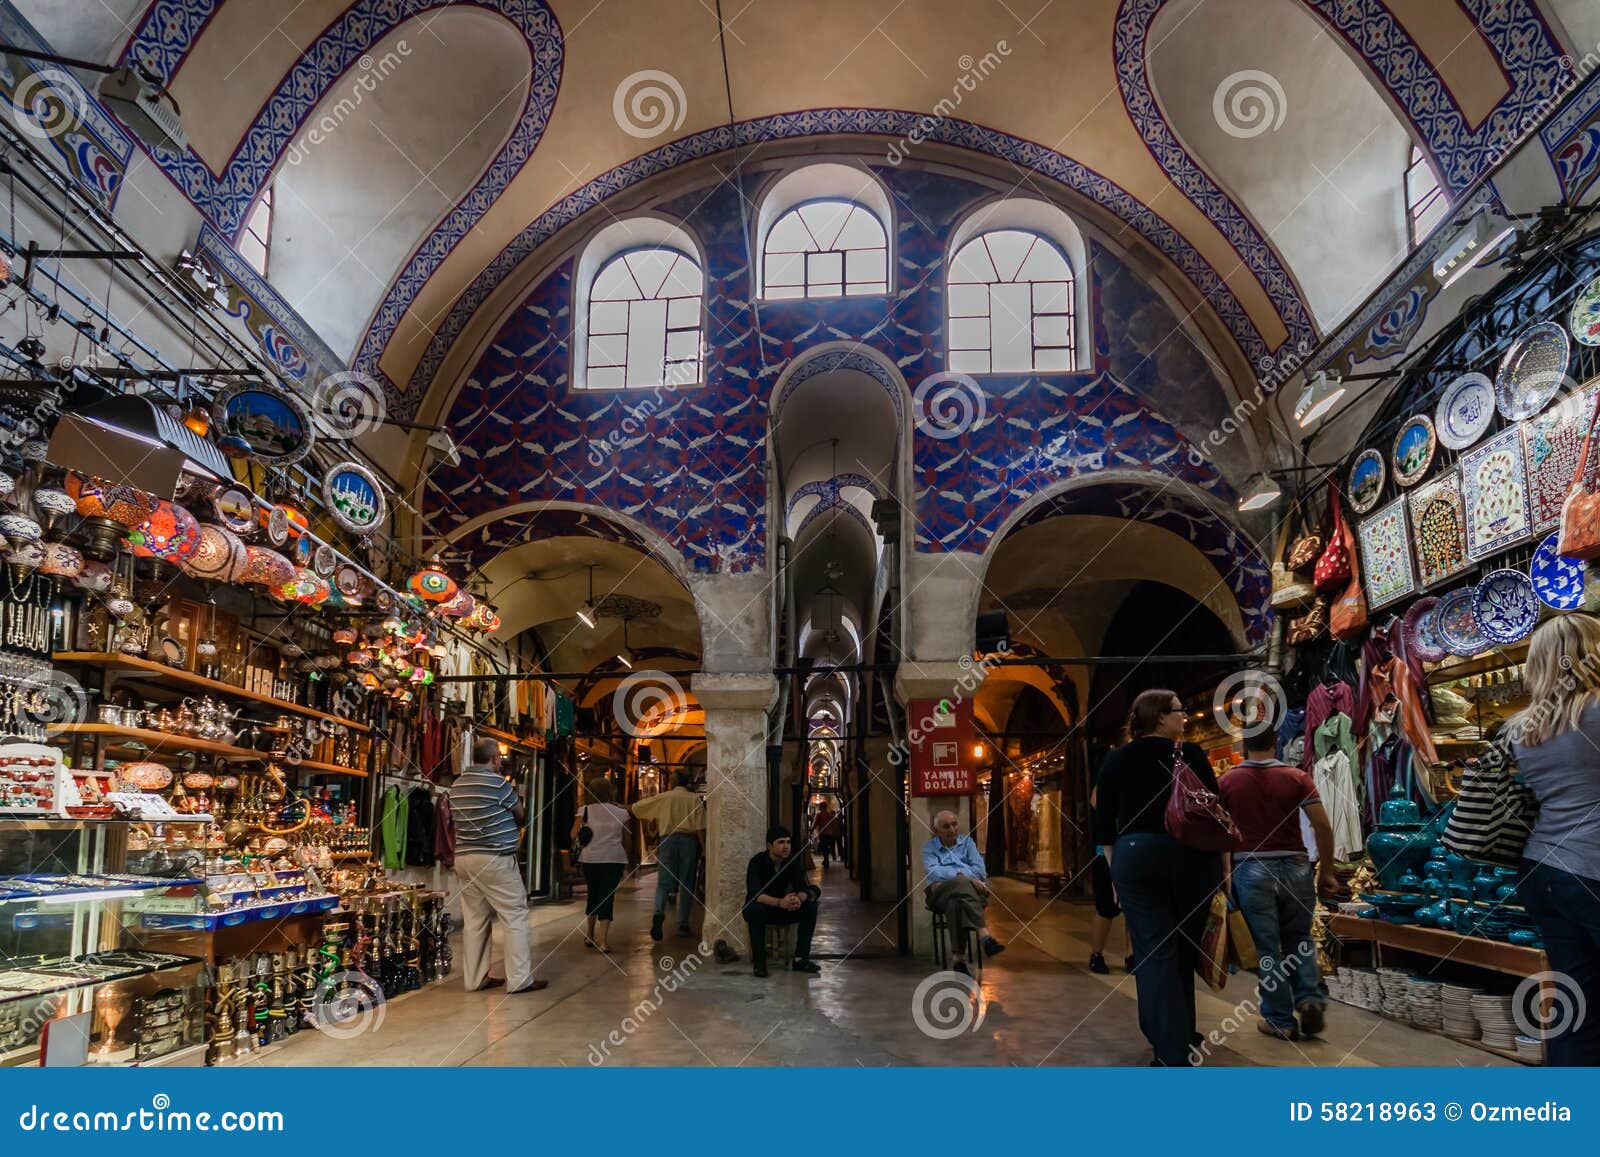 Premium Photo  Istanbul, turkey - september 08, 2014: the grand bazaar is  one of the largest and oldest covered markets in the world on september 08,  2014 in istanbul, turkey.